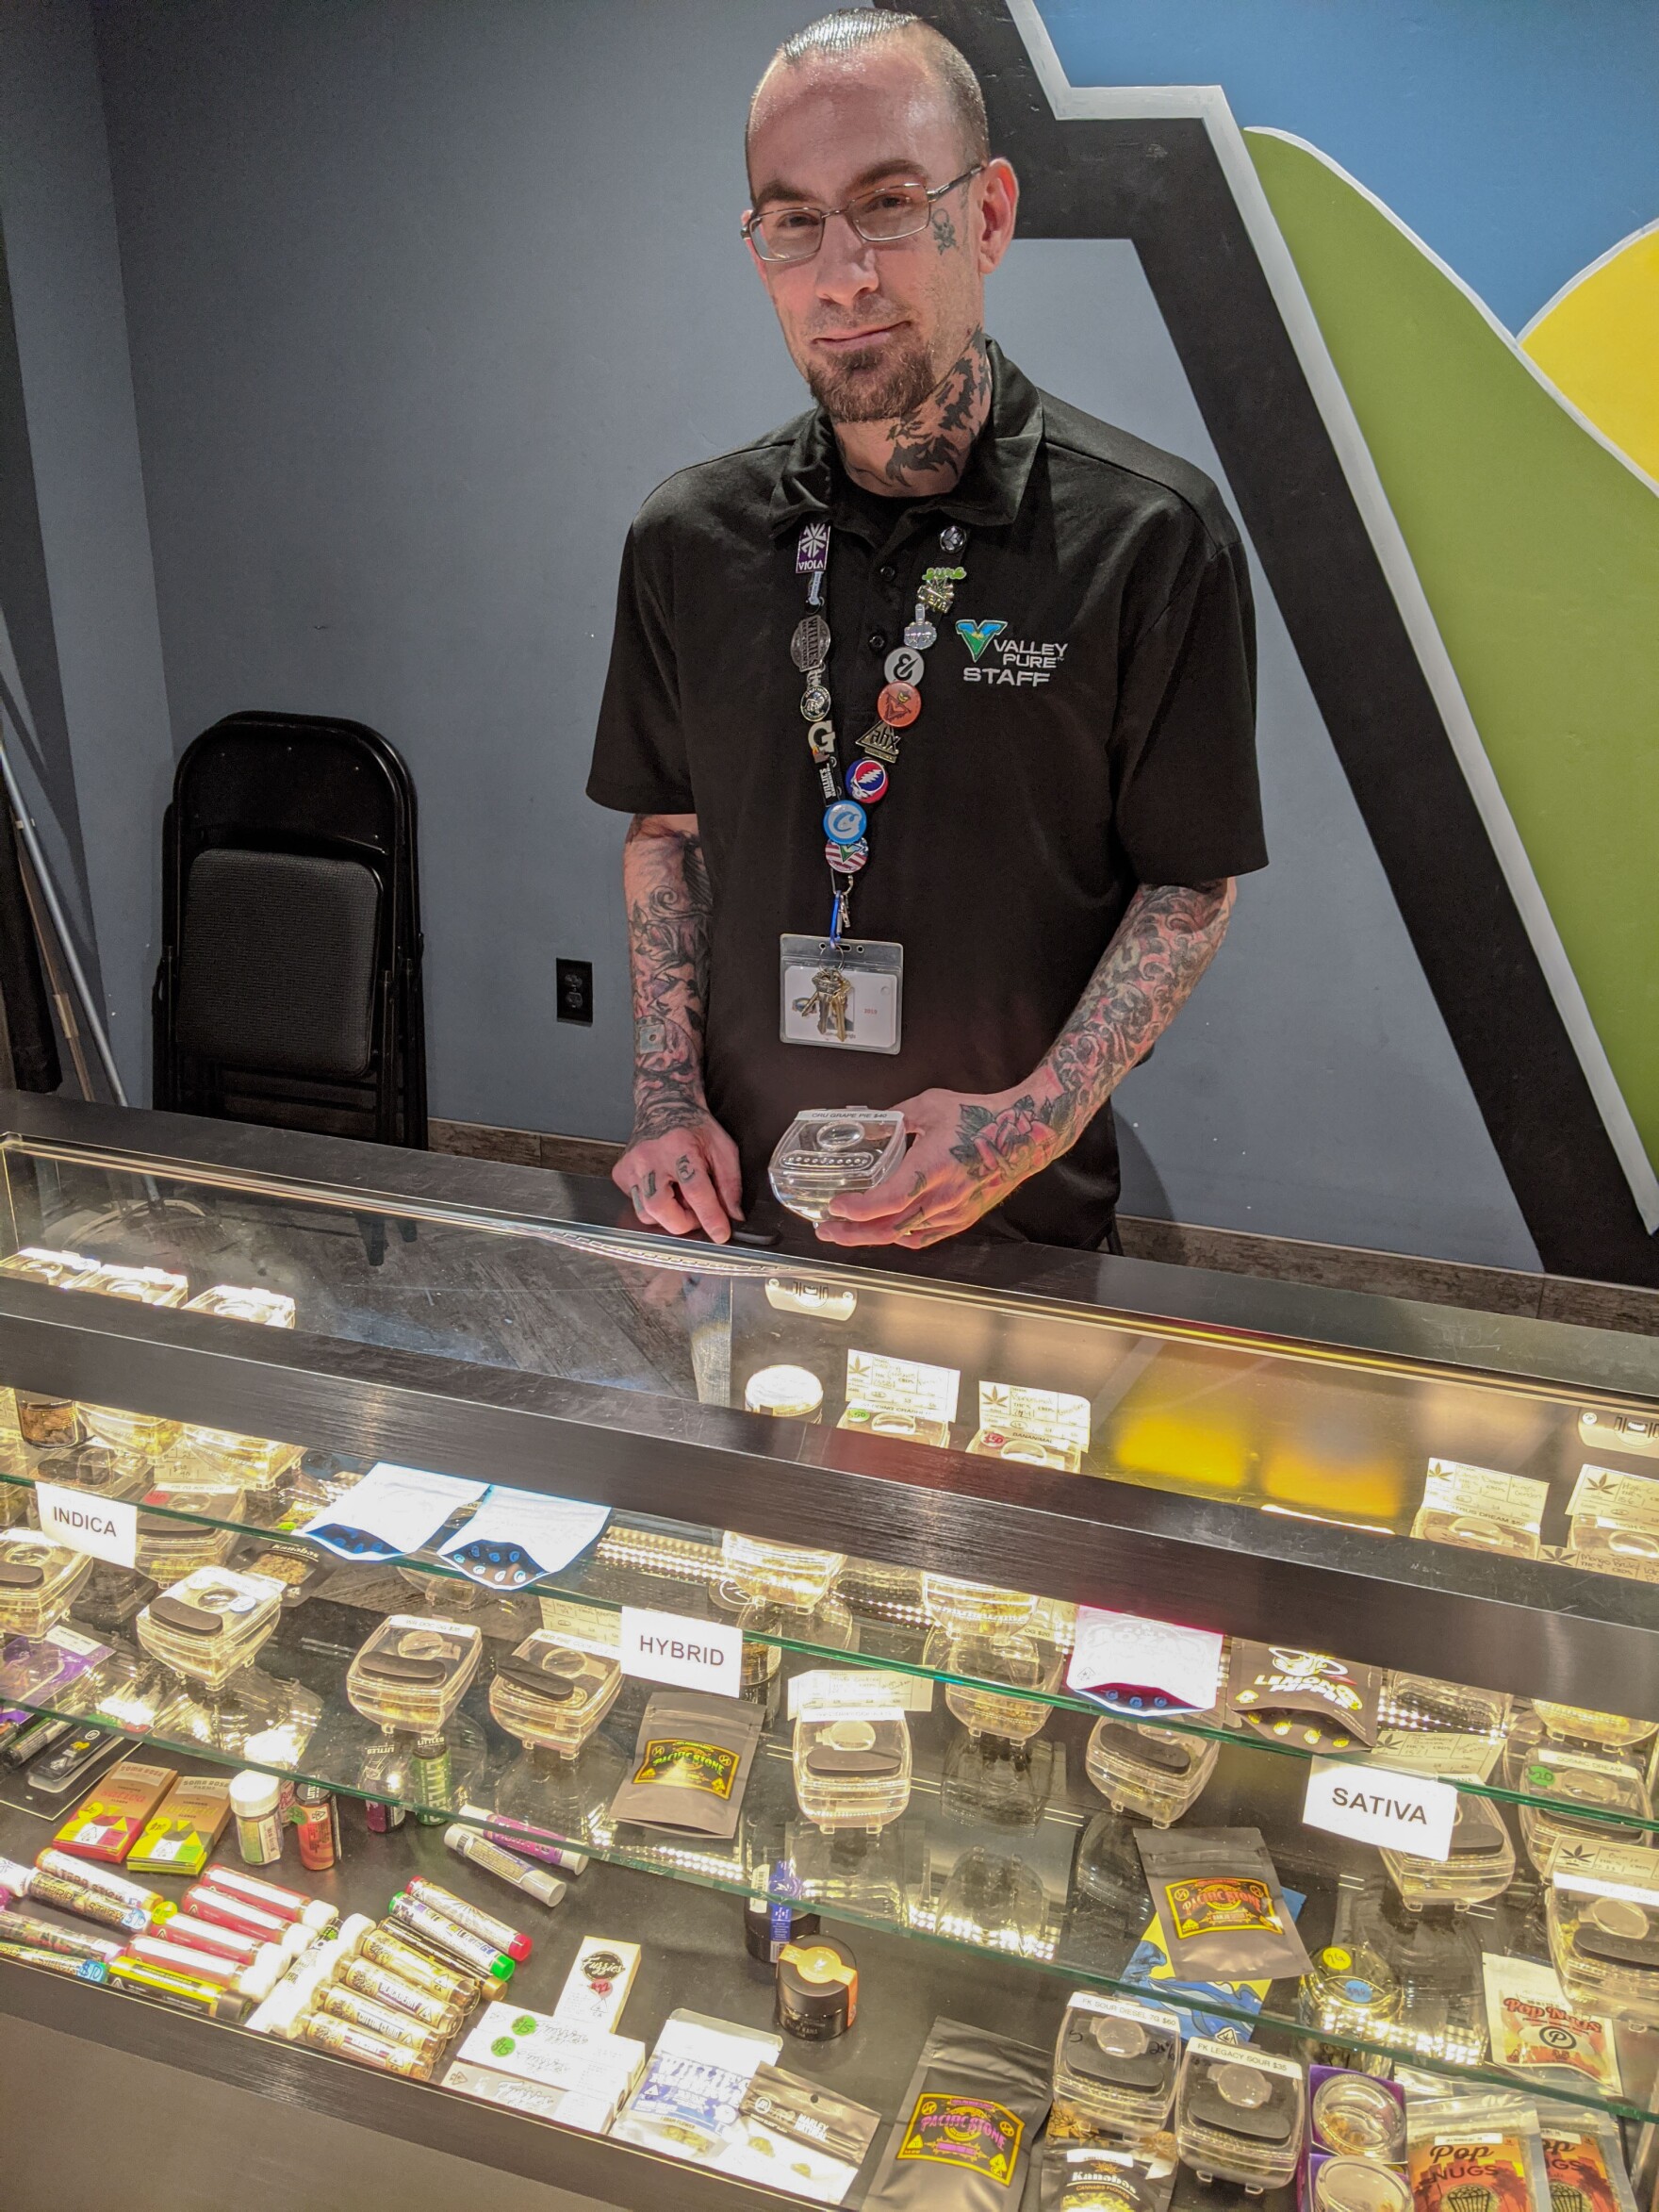 a smiling bald white man with tattoos stands behind a counter in a weed shop, the glass display case is filled with marijuana products